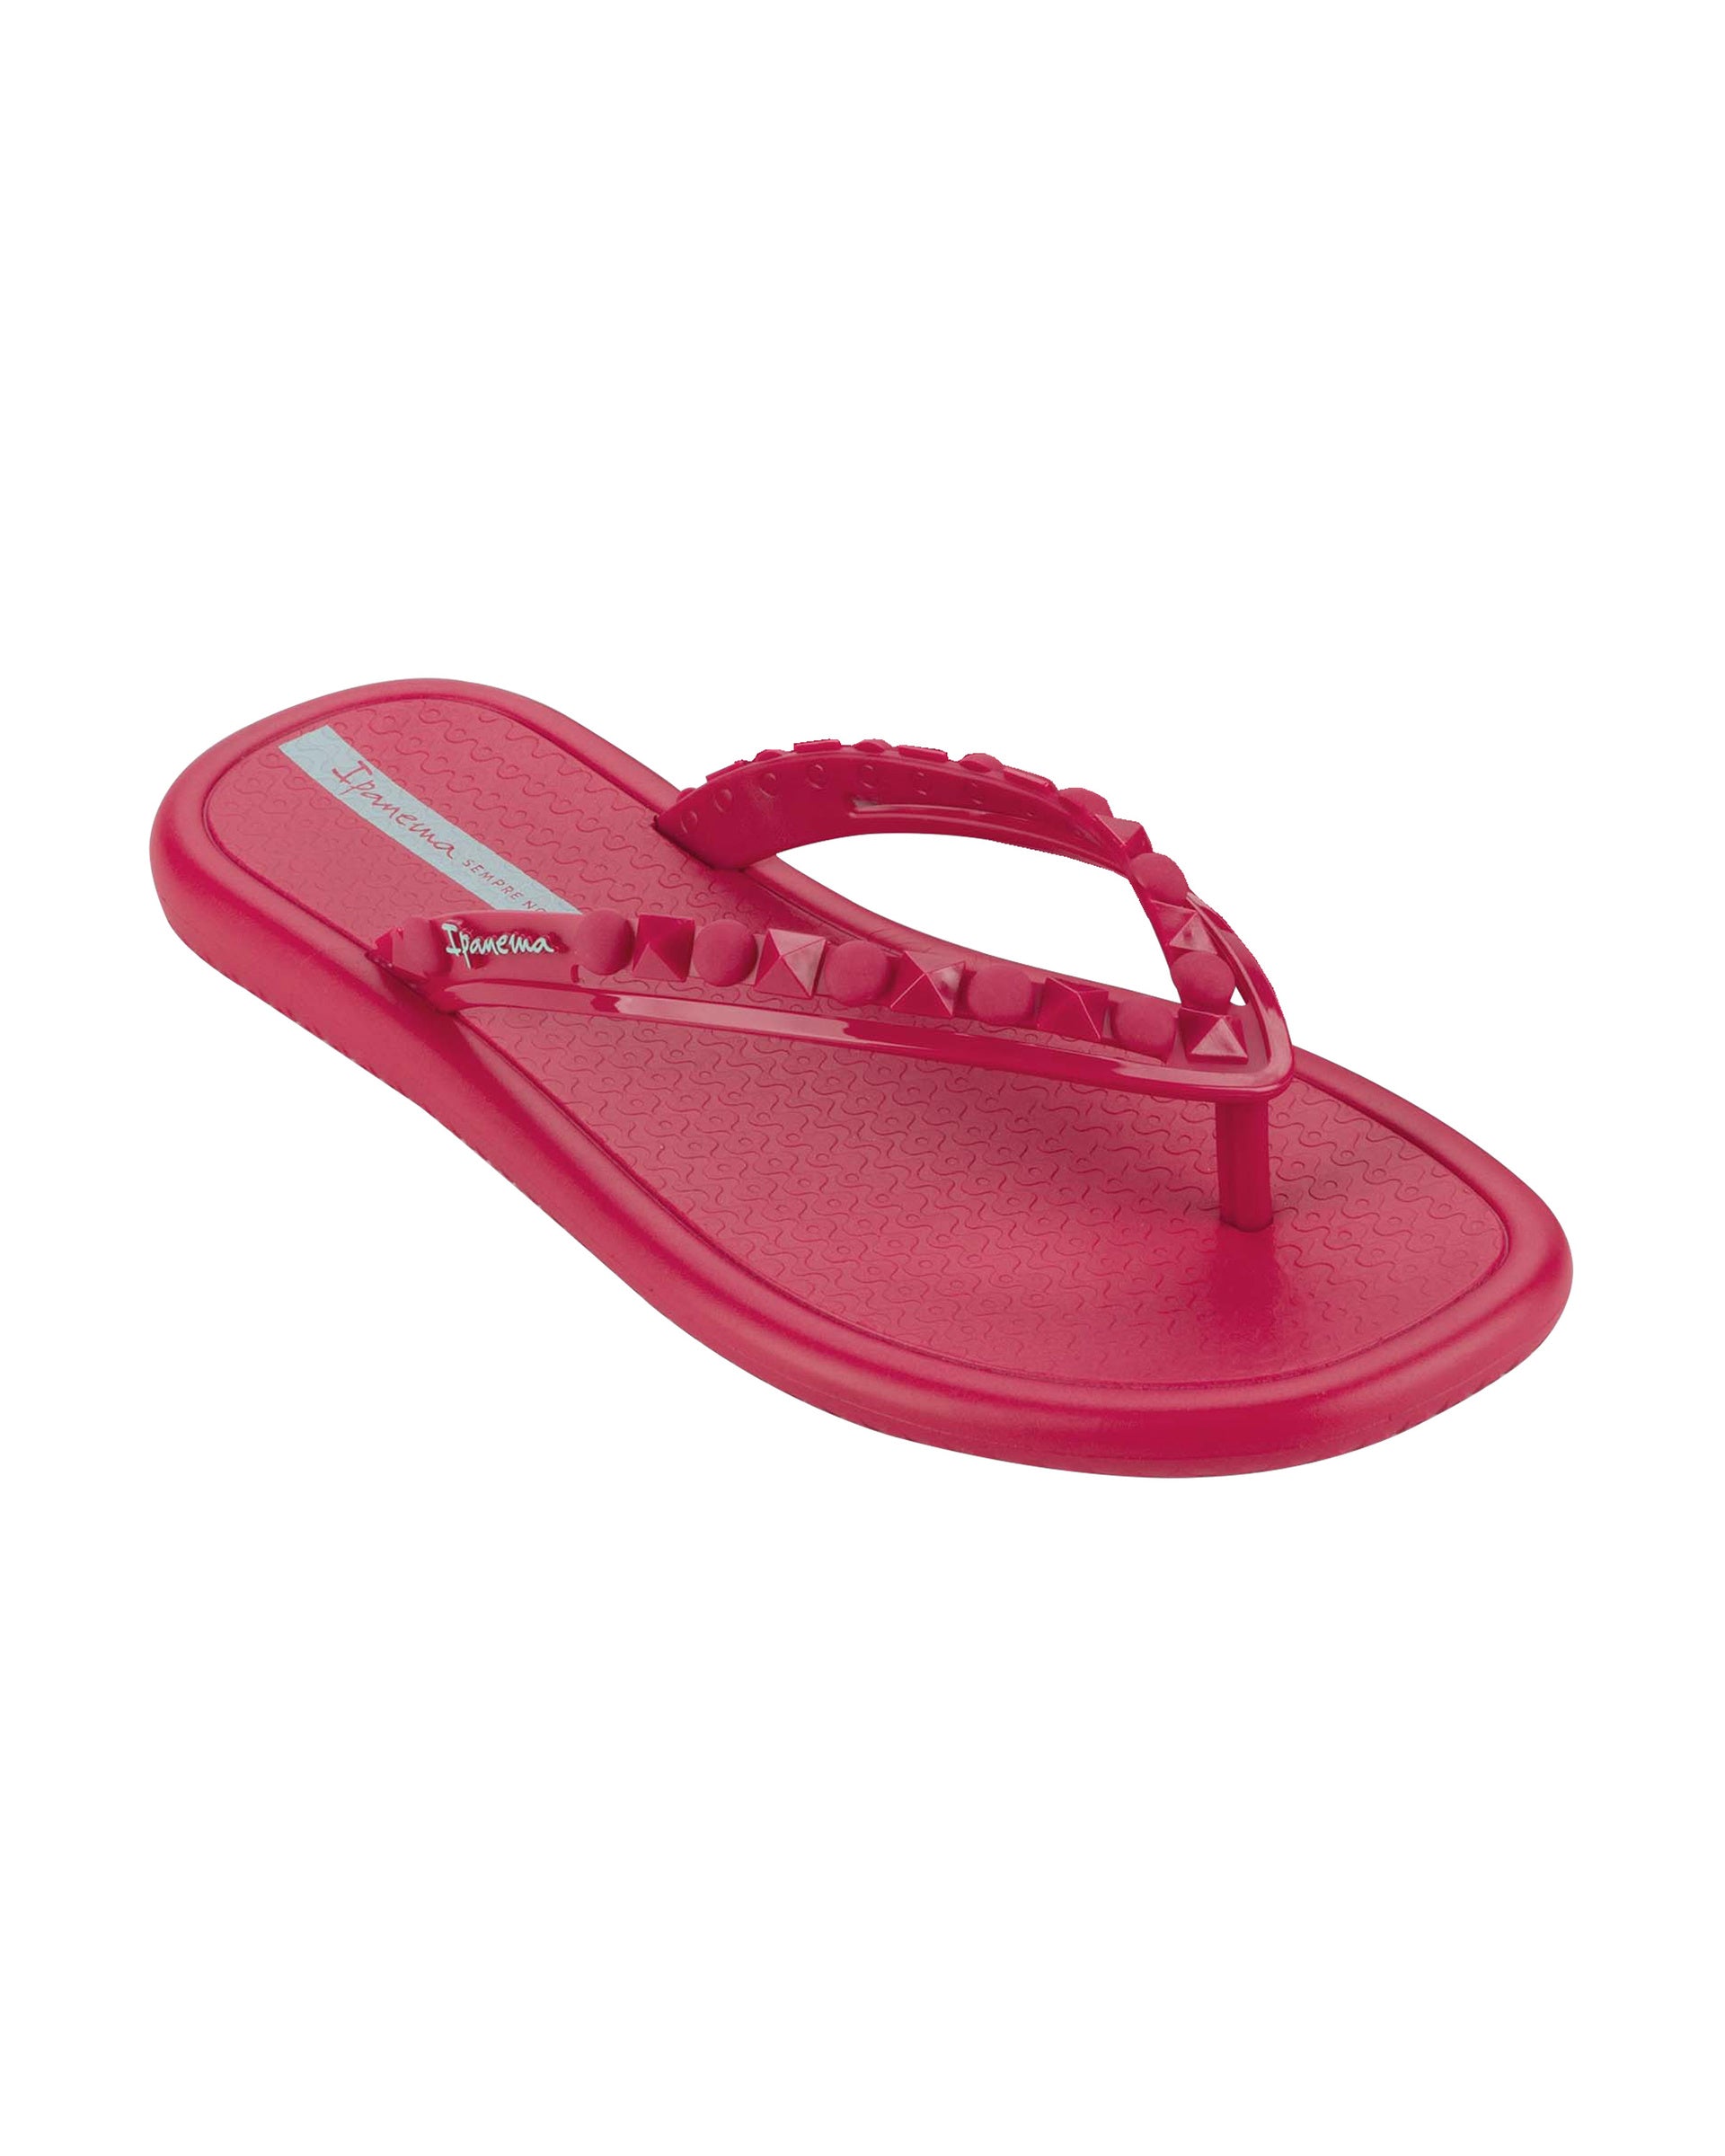 Angled view of a dark pink Ipanema Meu Sol women's flip flop with stud details on strap.